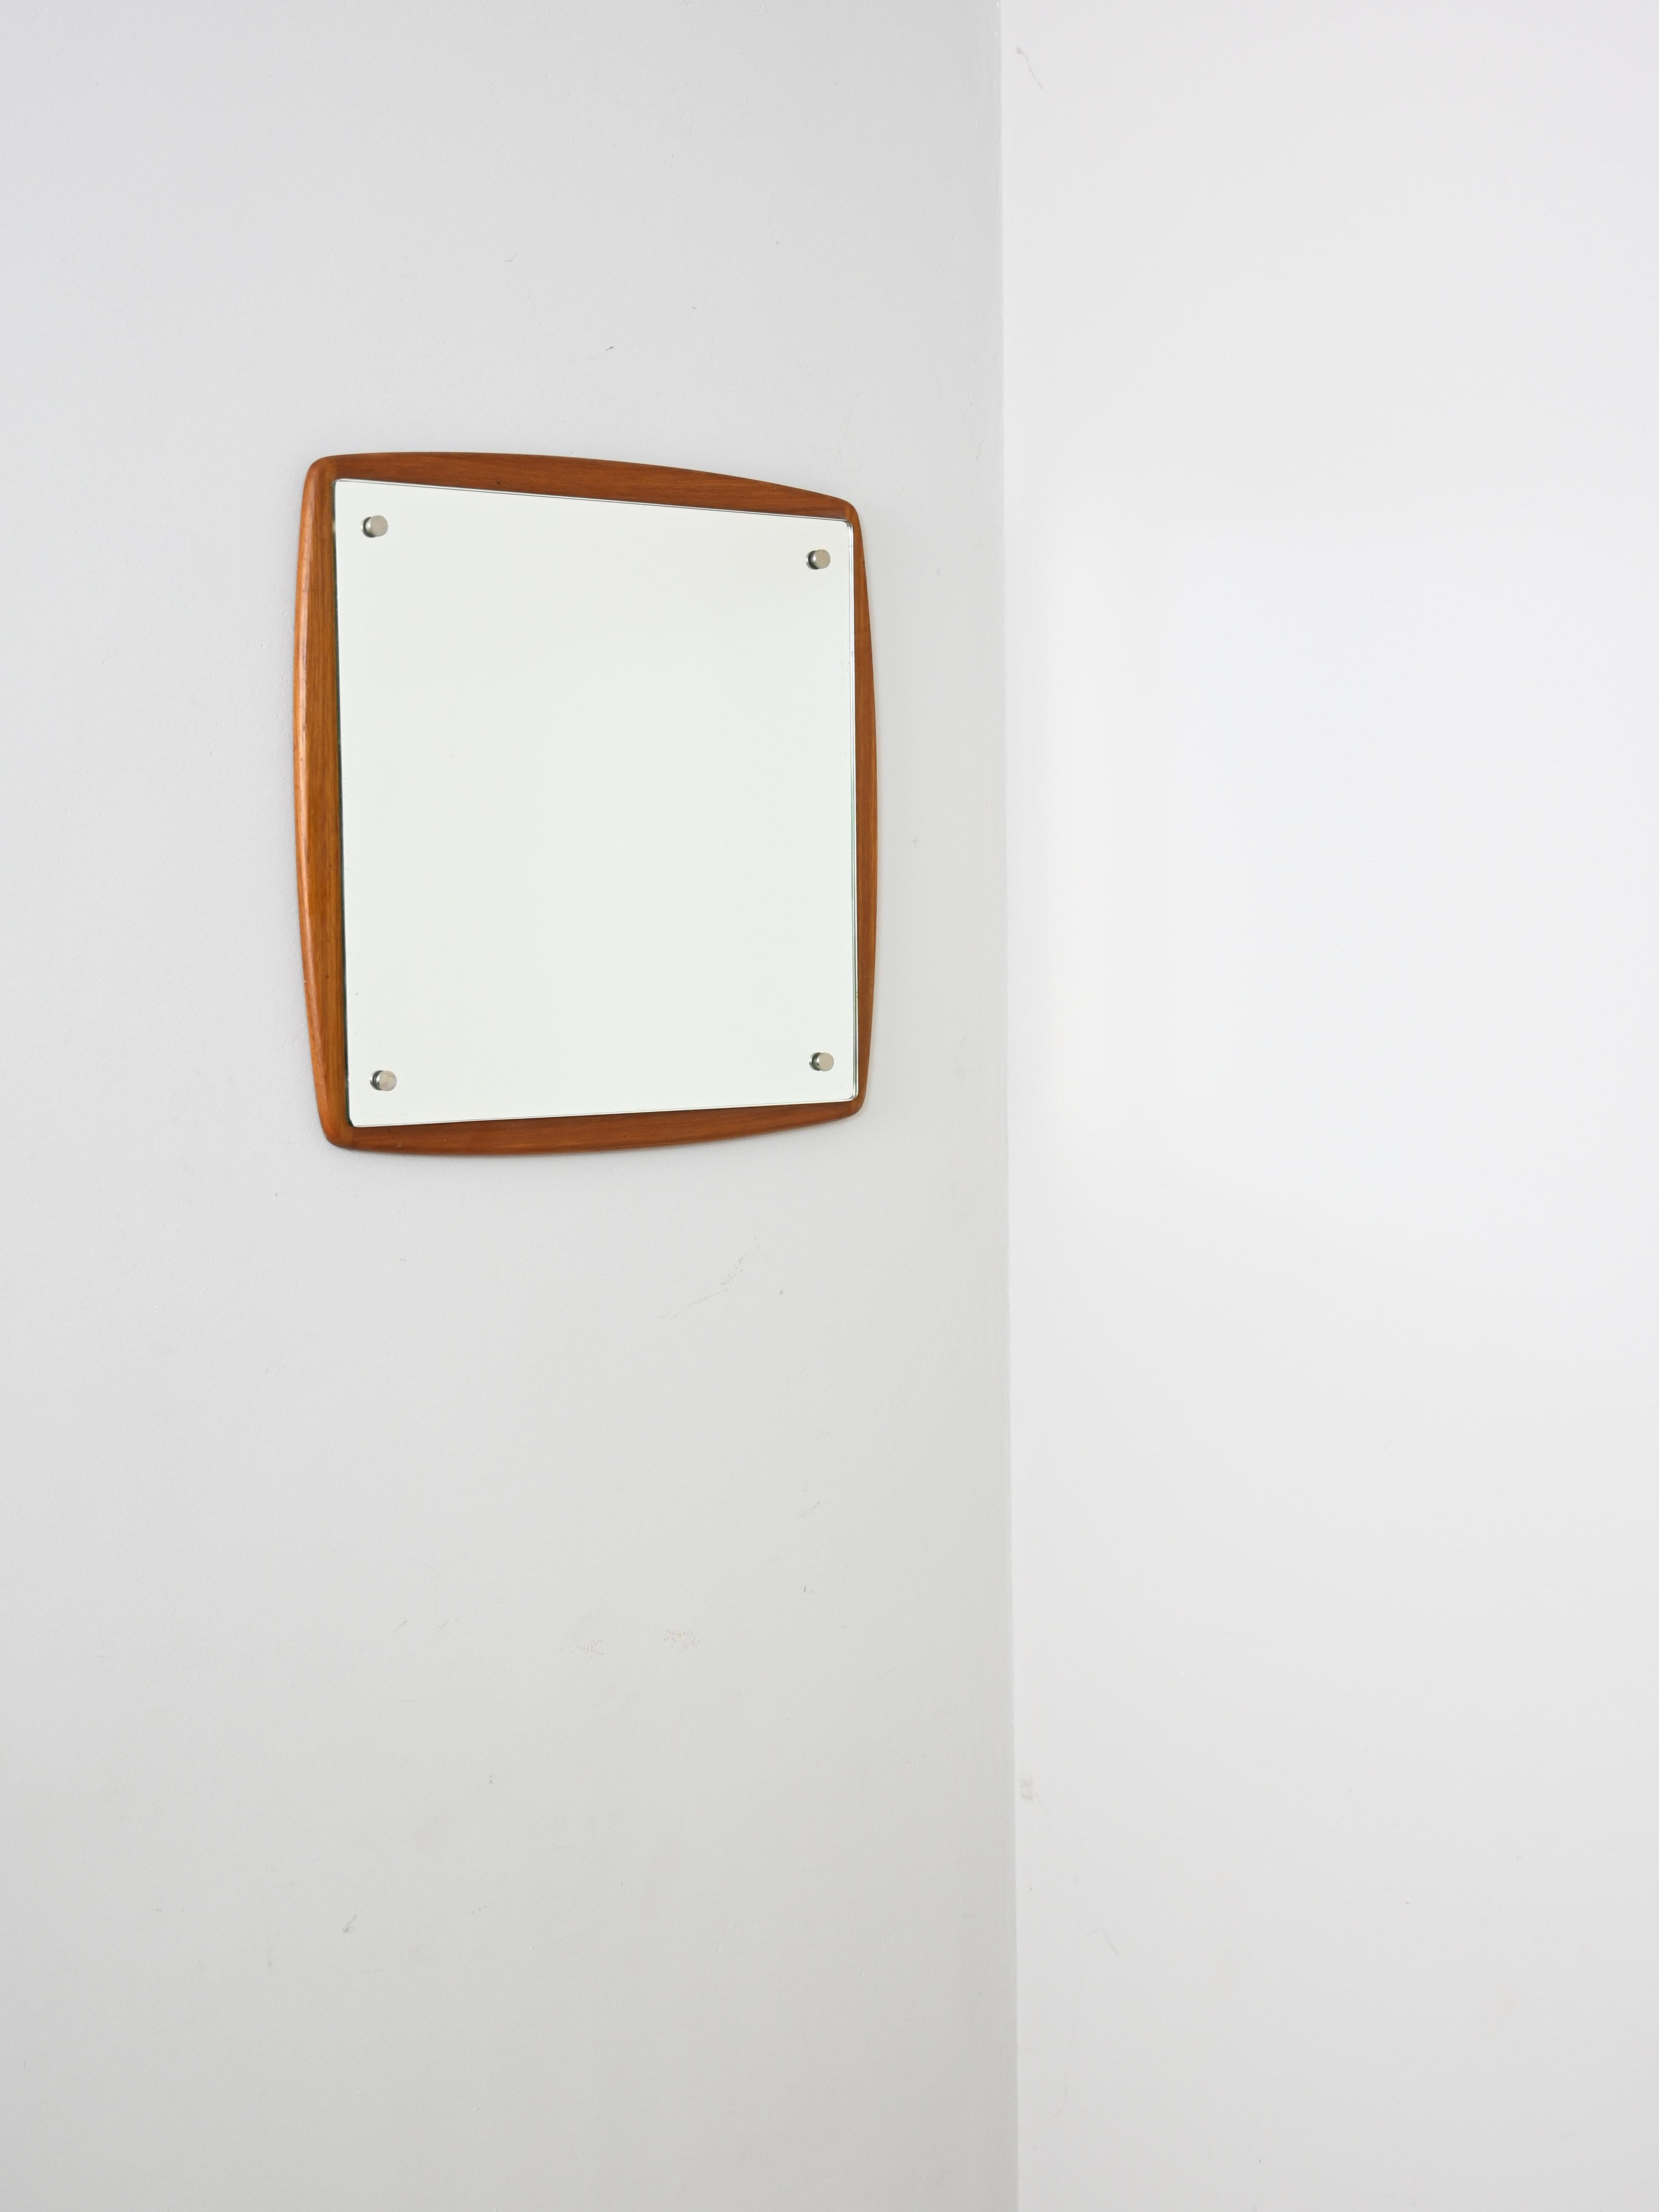 Vintage Swedish-made mirror with teak wood frame.

A piece of furniture with modern and elegant lines that can be used in different rooms of the house due to its small size.

Good condition. It may show some signs of time. Please pay attention to